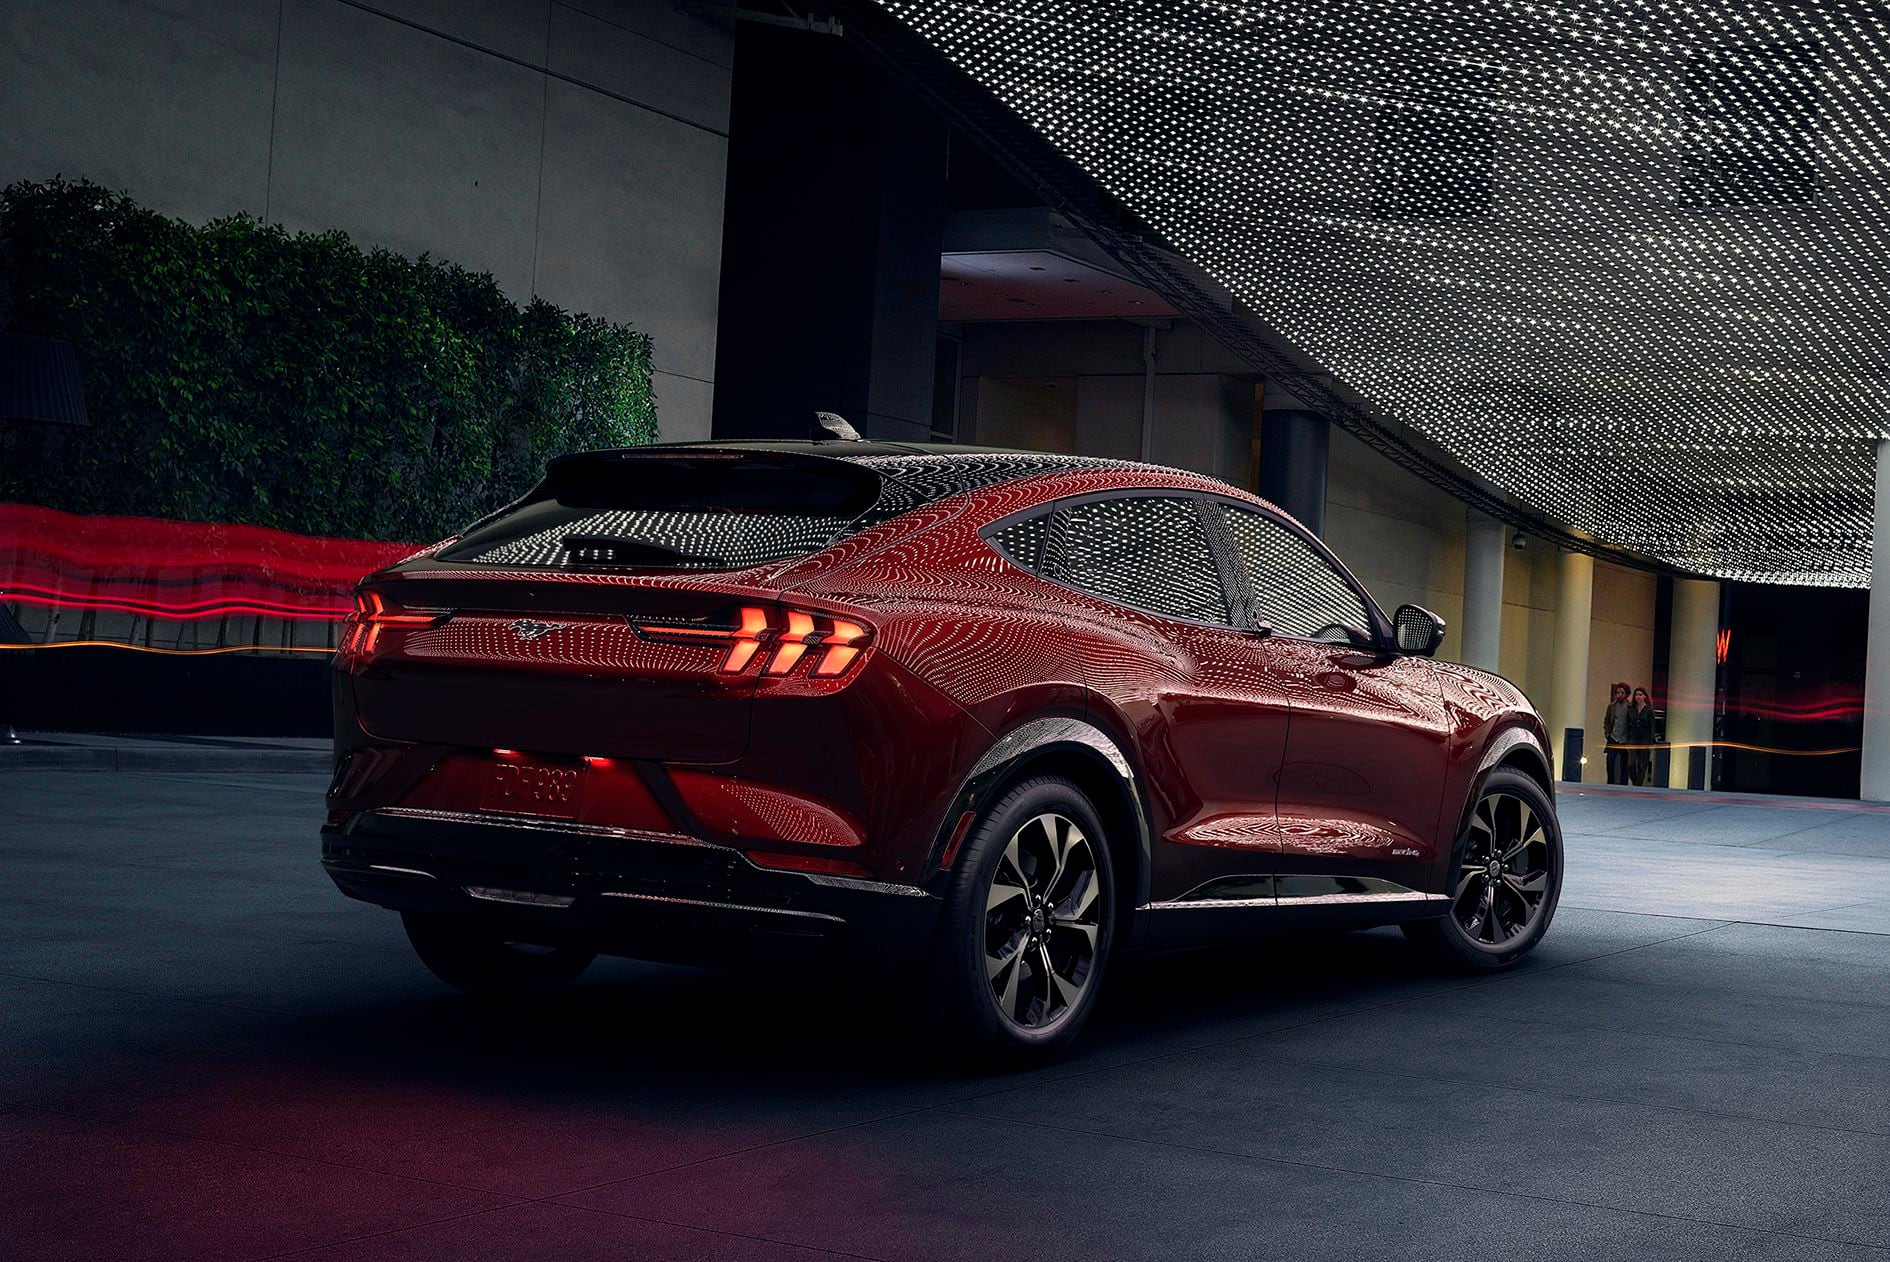 Review The 21 Ford Mustang Mach E Is A Stylish New Ev That S Quick Quiet And Fun To Drive The Globe And Mail